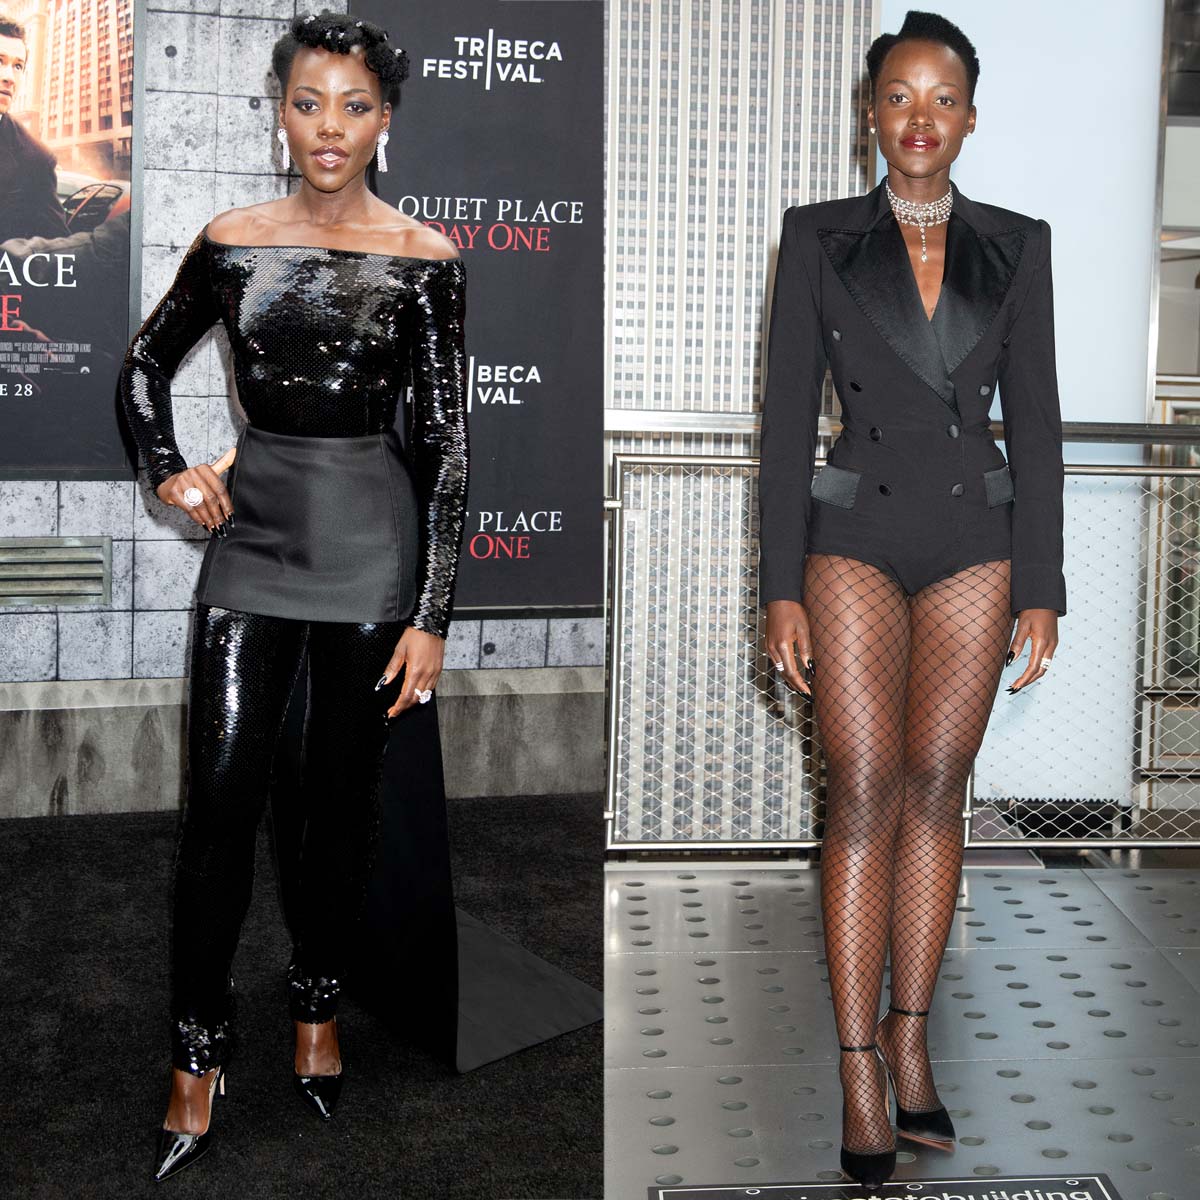 Lupita Nyong'o embraces her daring side in a Prada Catsuit and a Dolce & Gabbana Playsuit at the A Quiet Place: Day One New York City premiere and photocal